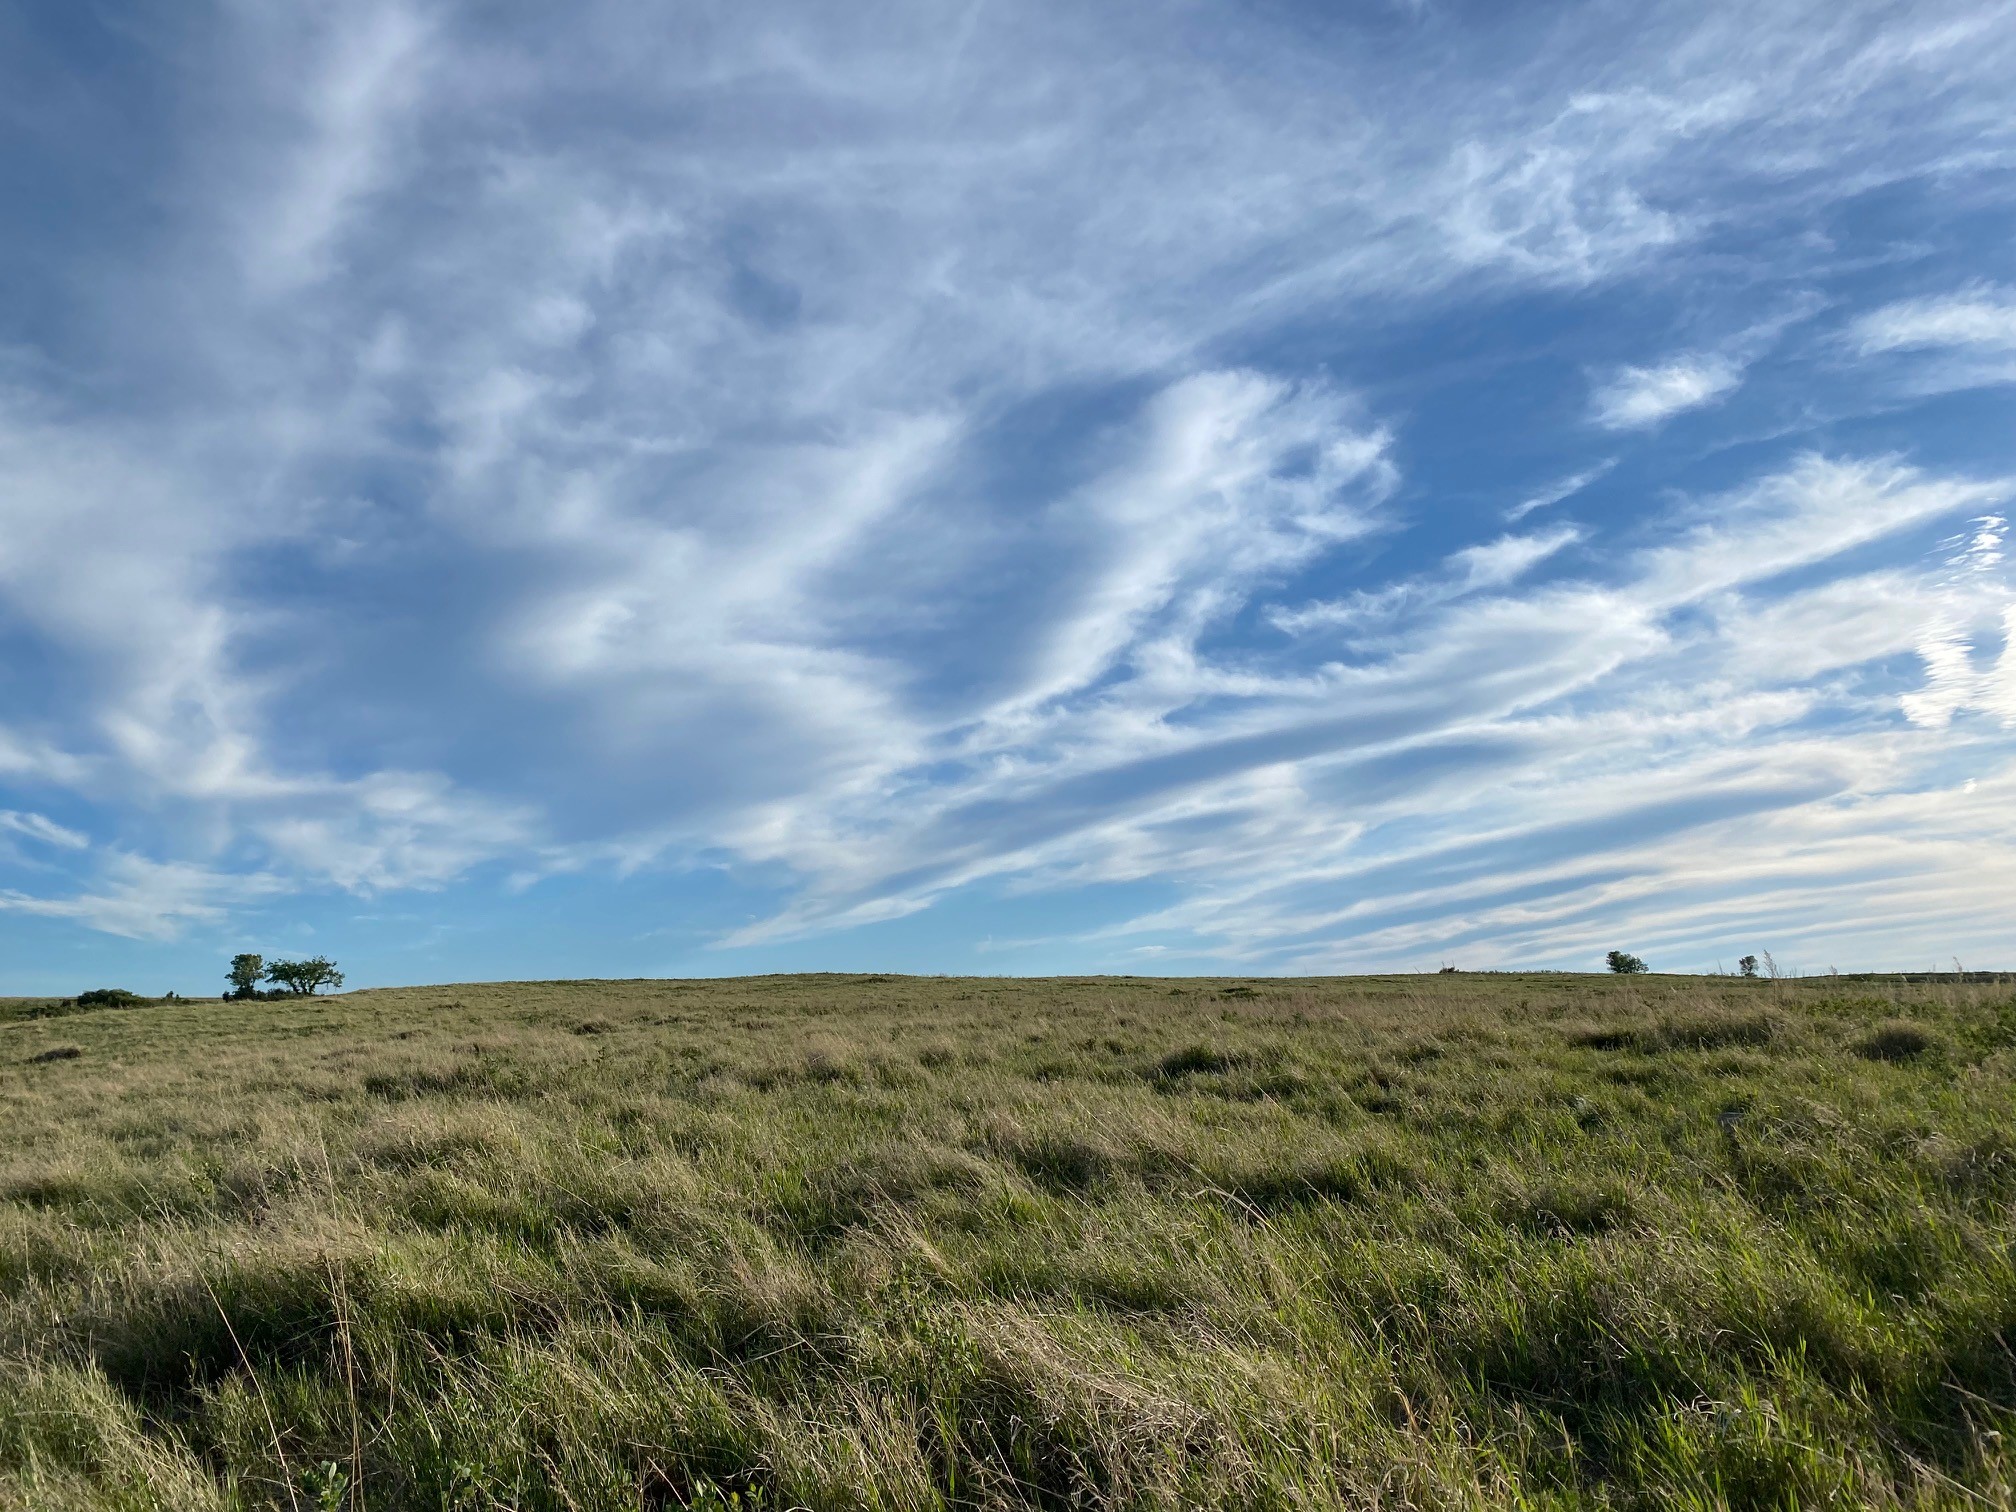 Landscape of a grassland with big sky and scattered clouds. 